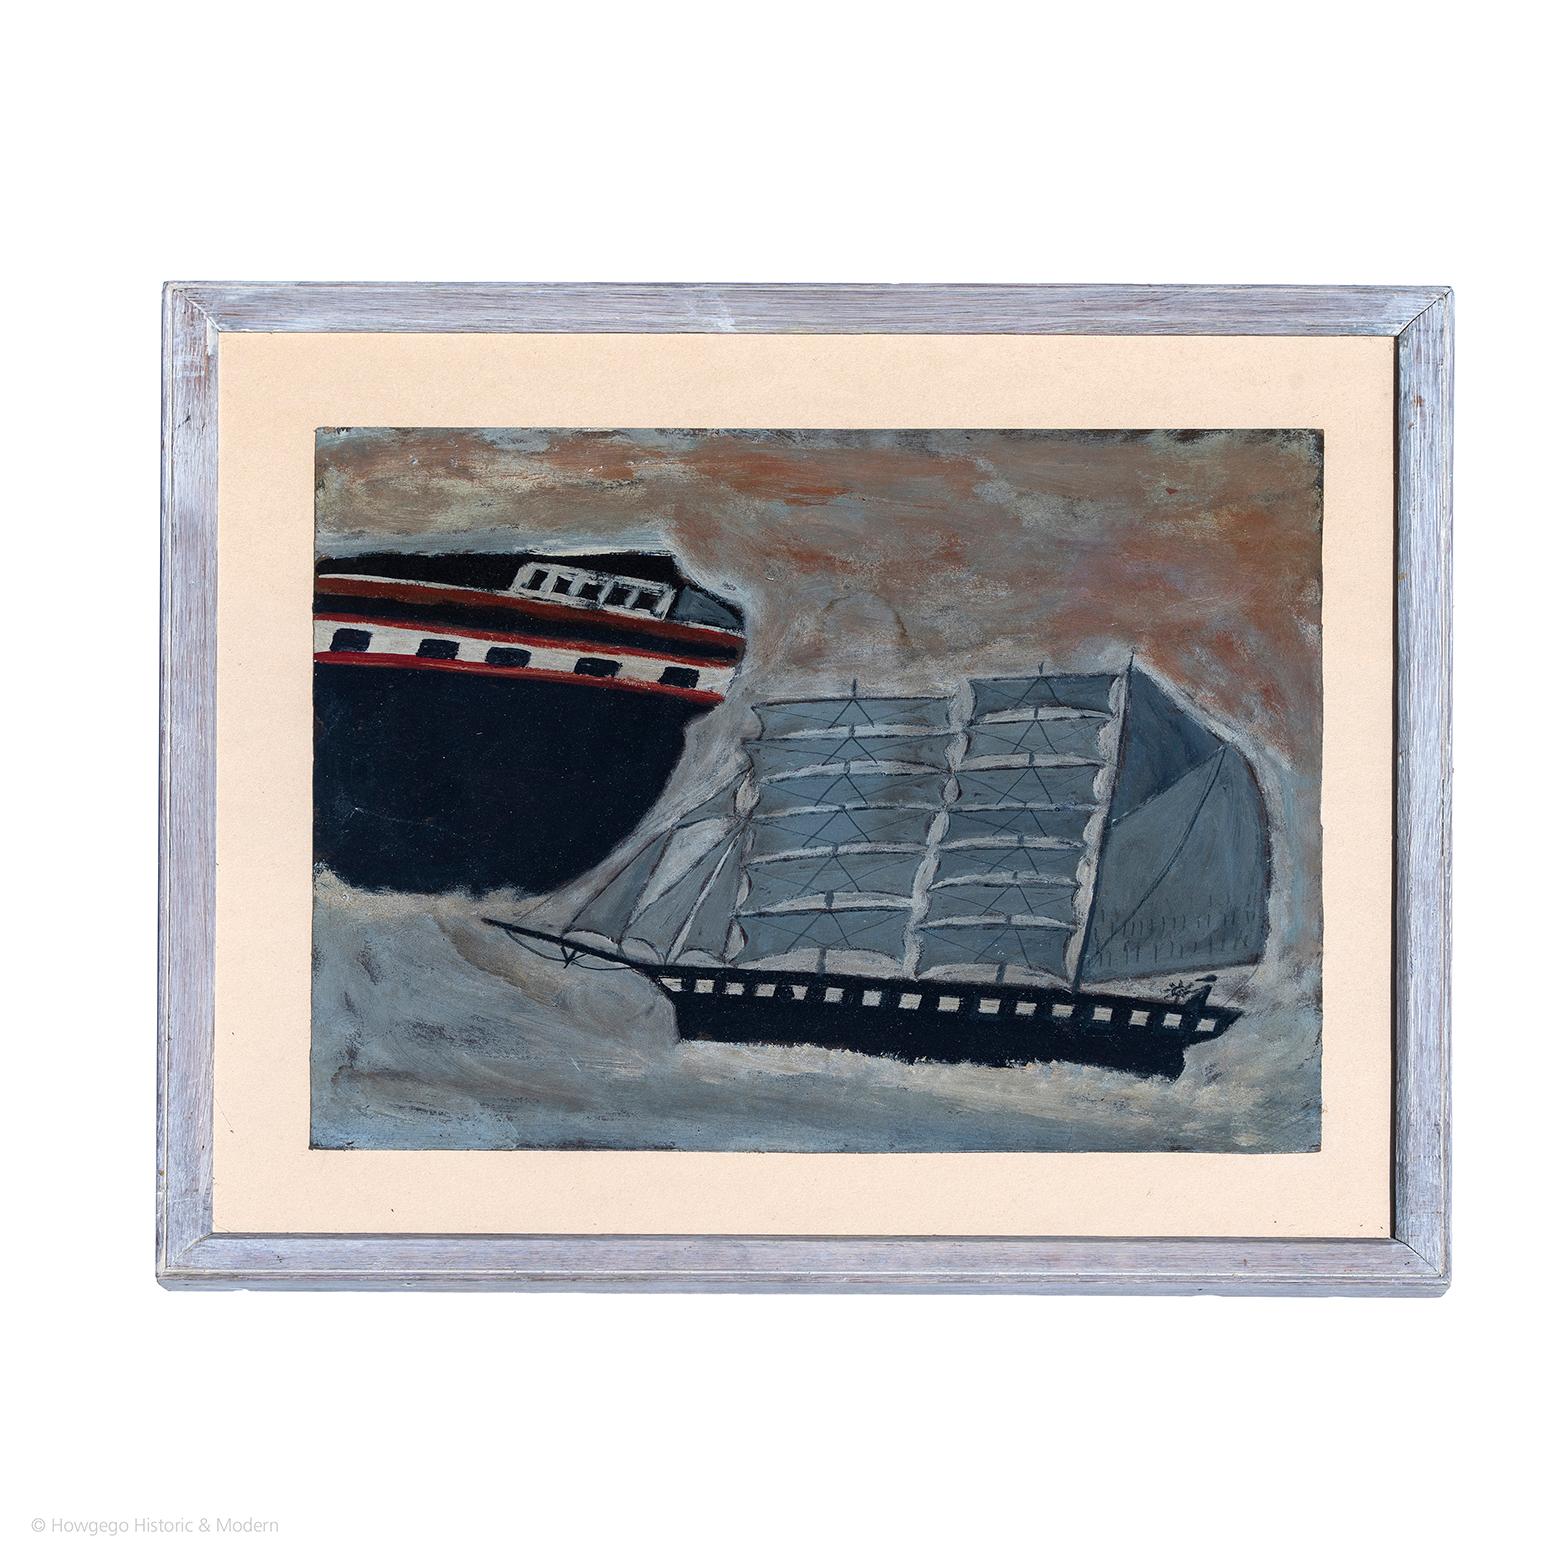 Topmast schooner sailing past a cargo ship
Oil on canvas
Characterful naive picture in the spirit of Alfred Wallis

Board length 28cm., 11